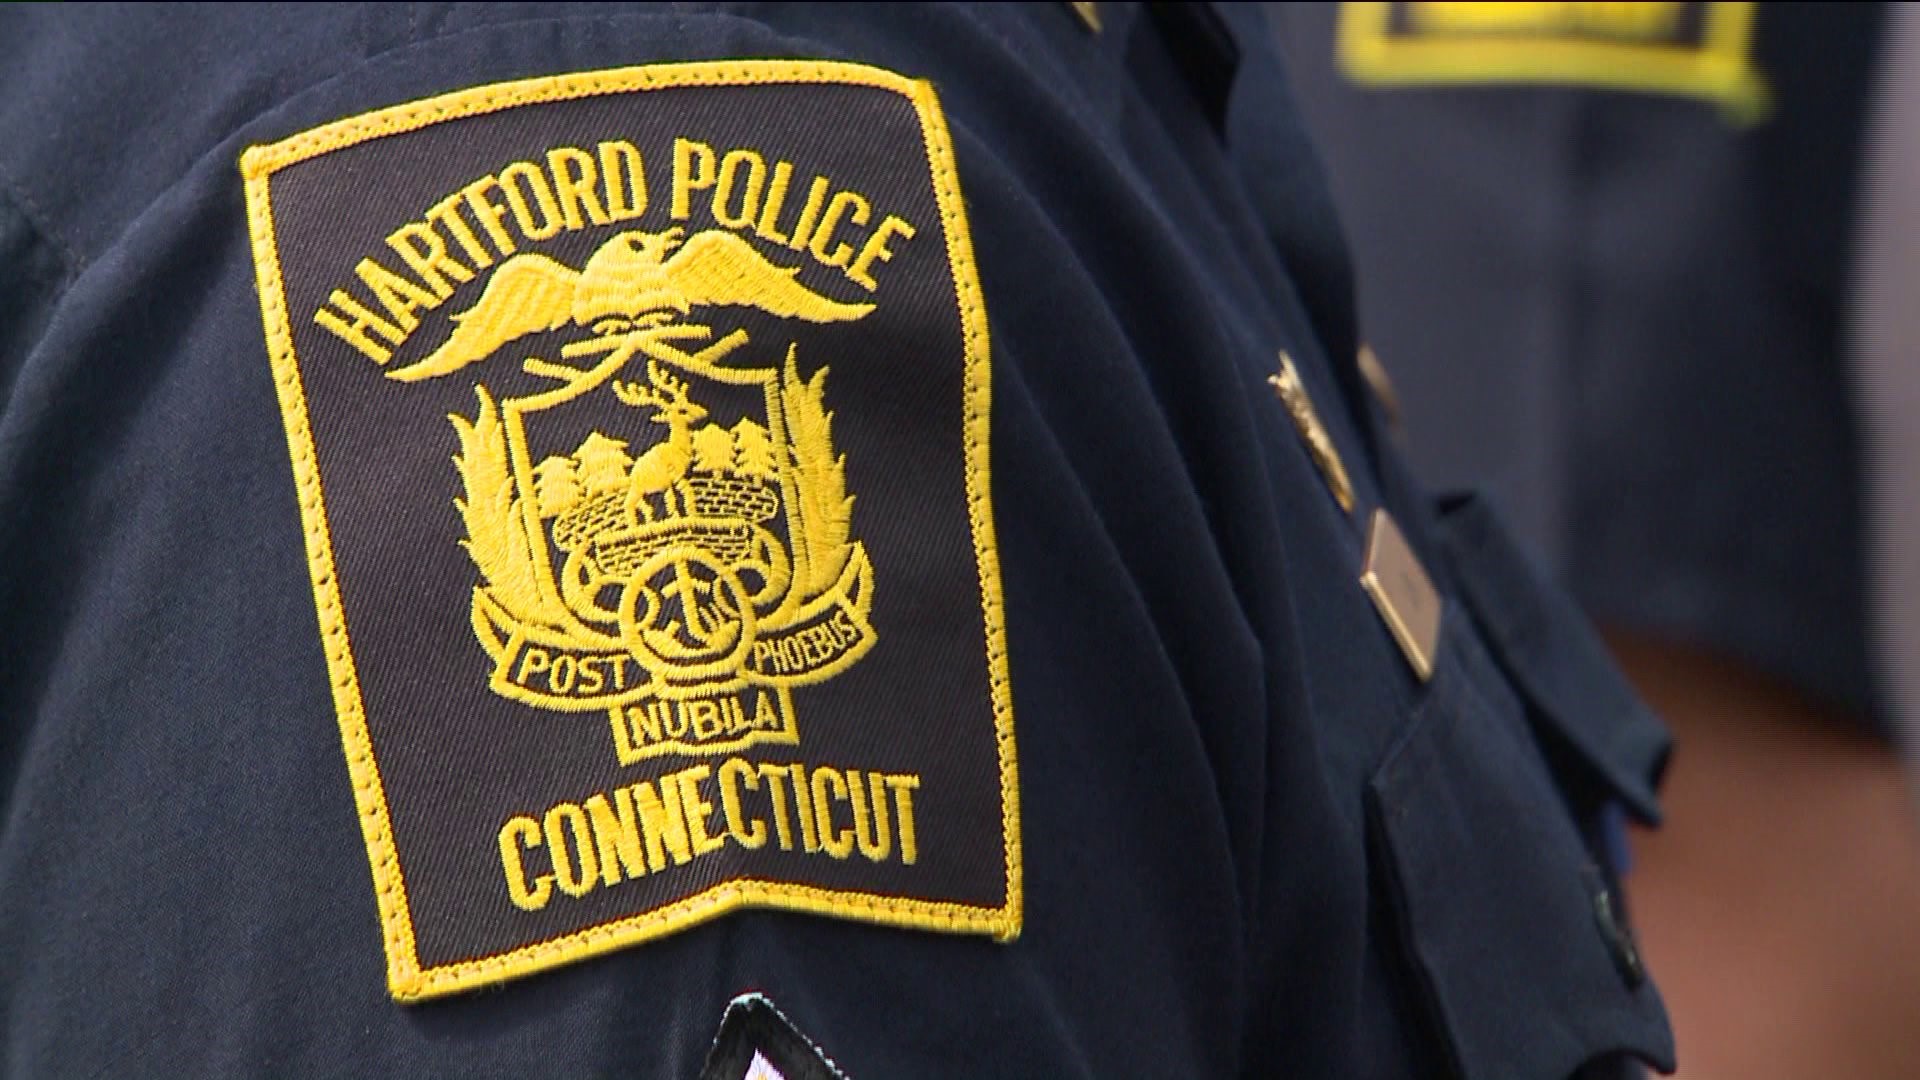 Hartford police identify officer who was stabbed and critically injured